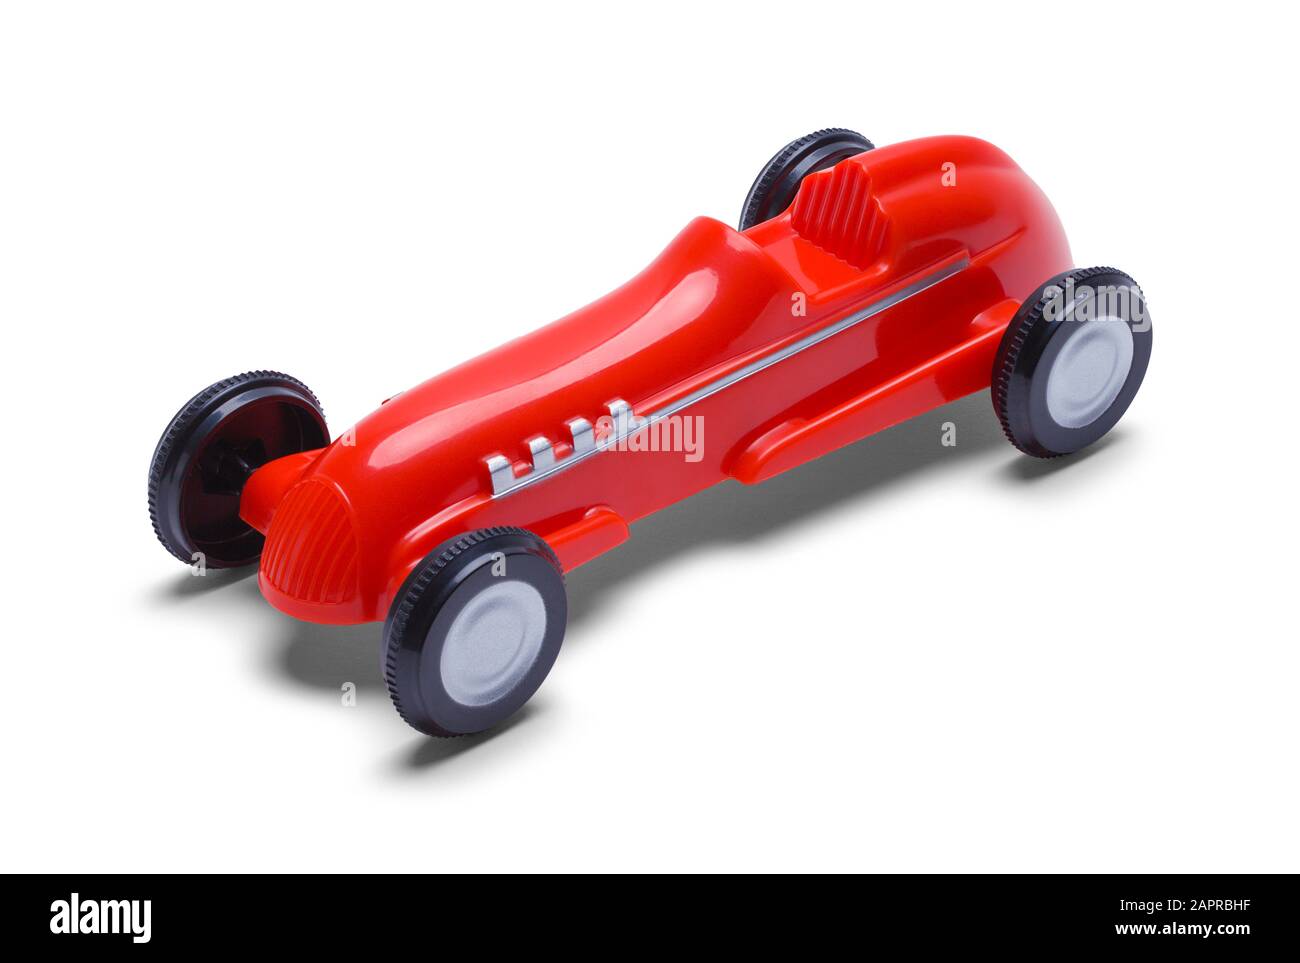 Red Plastic Toy Car Isolated on White Background. Stock Photo